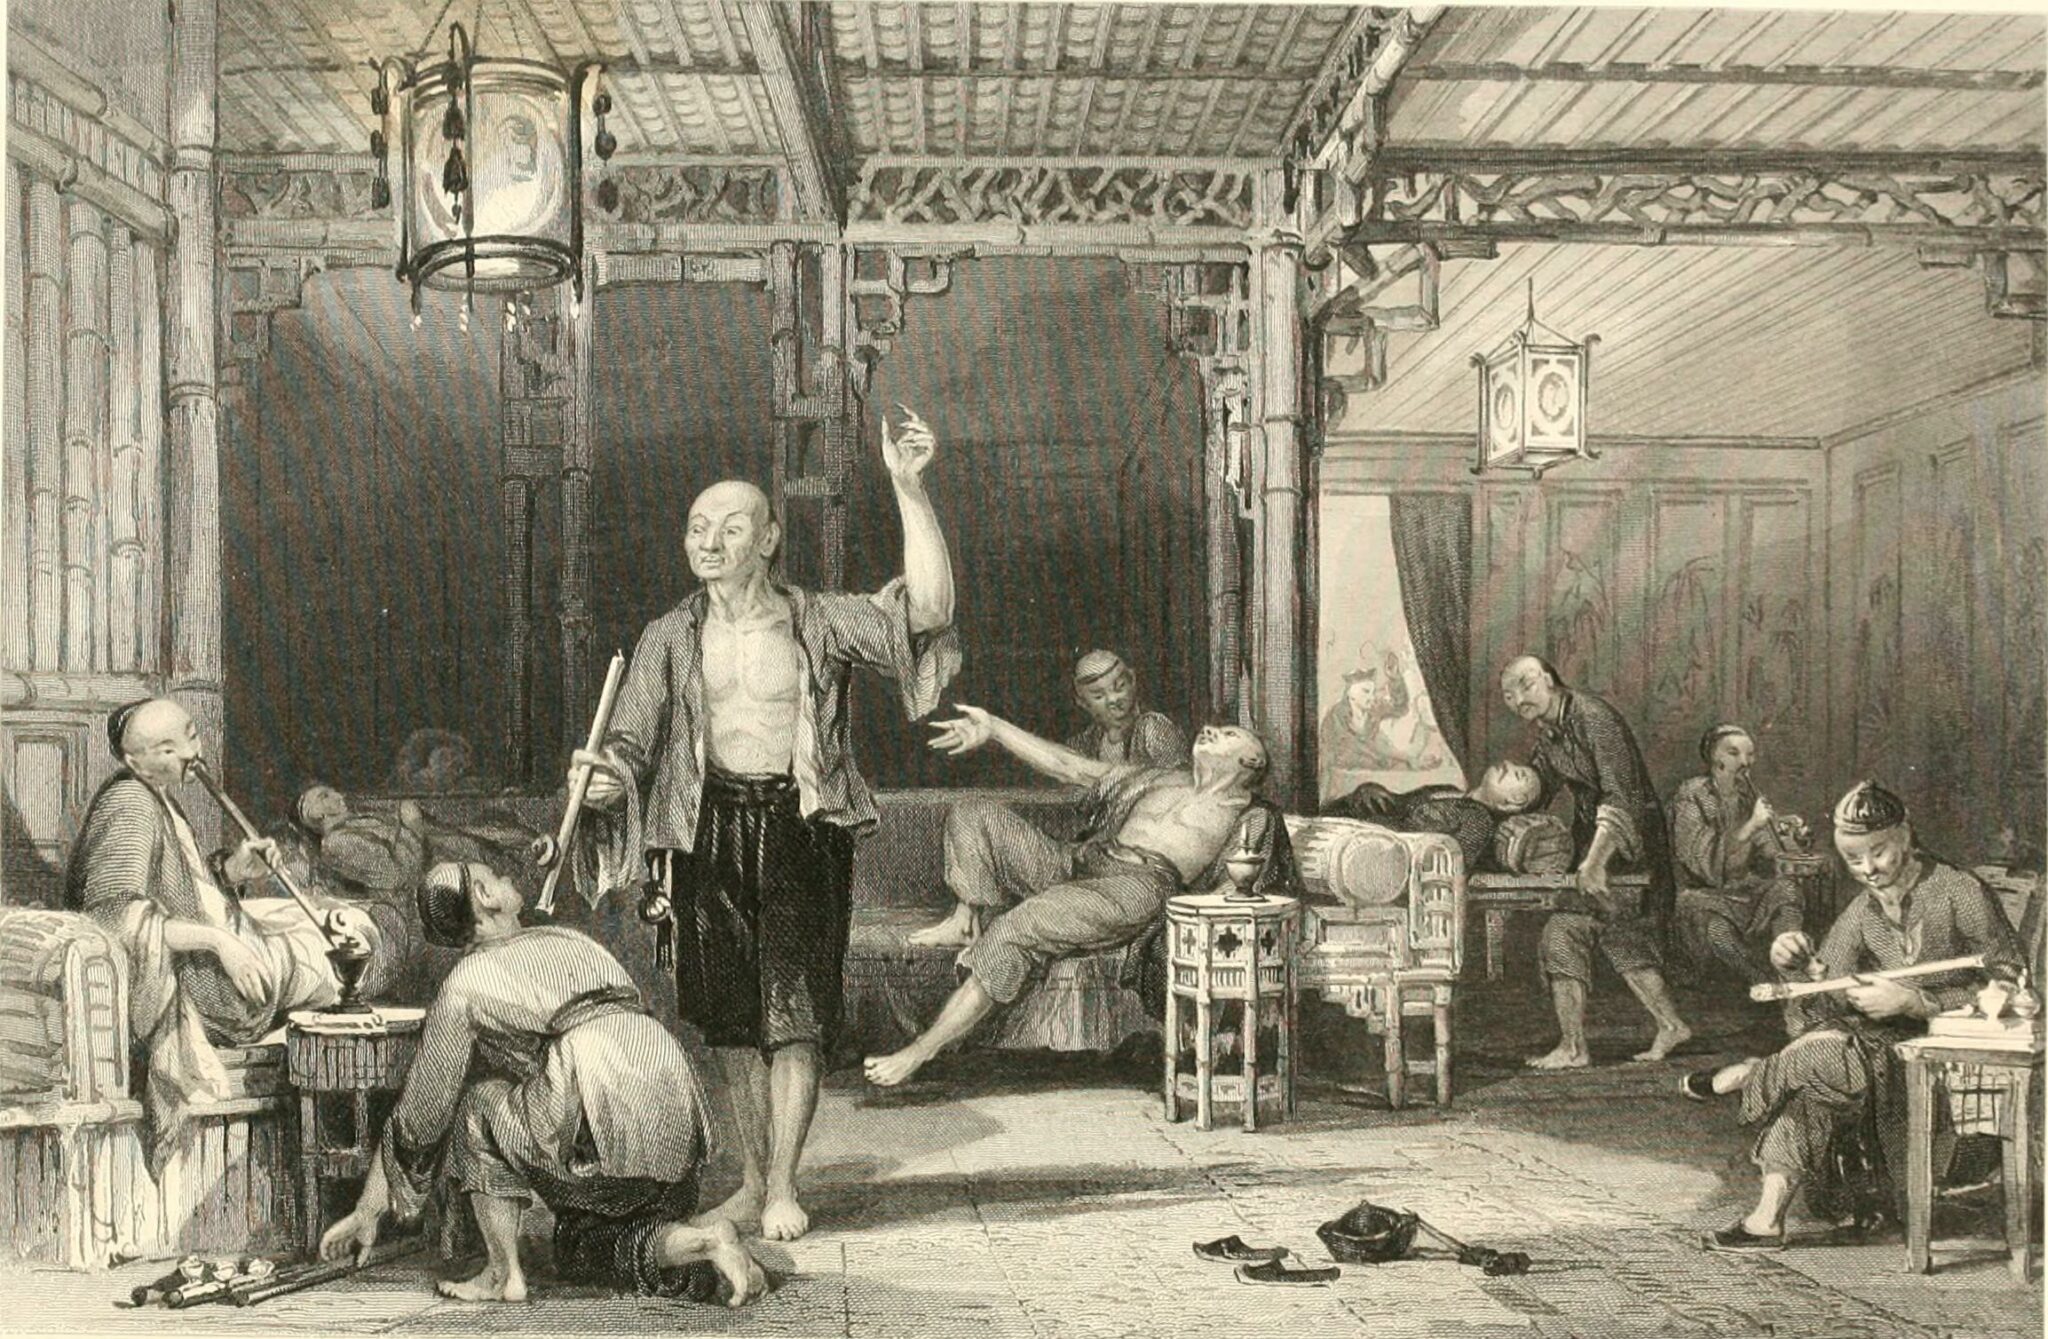 what were the opium wars between britain and china and why did the british seize hong kong in 1842